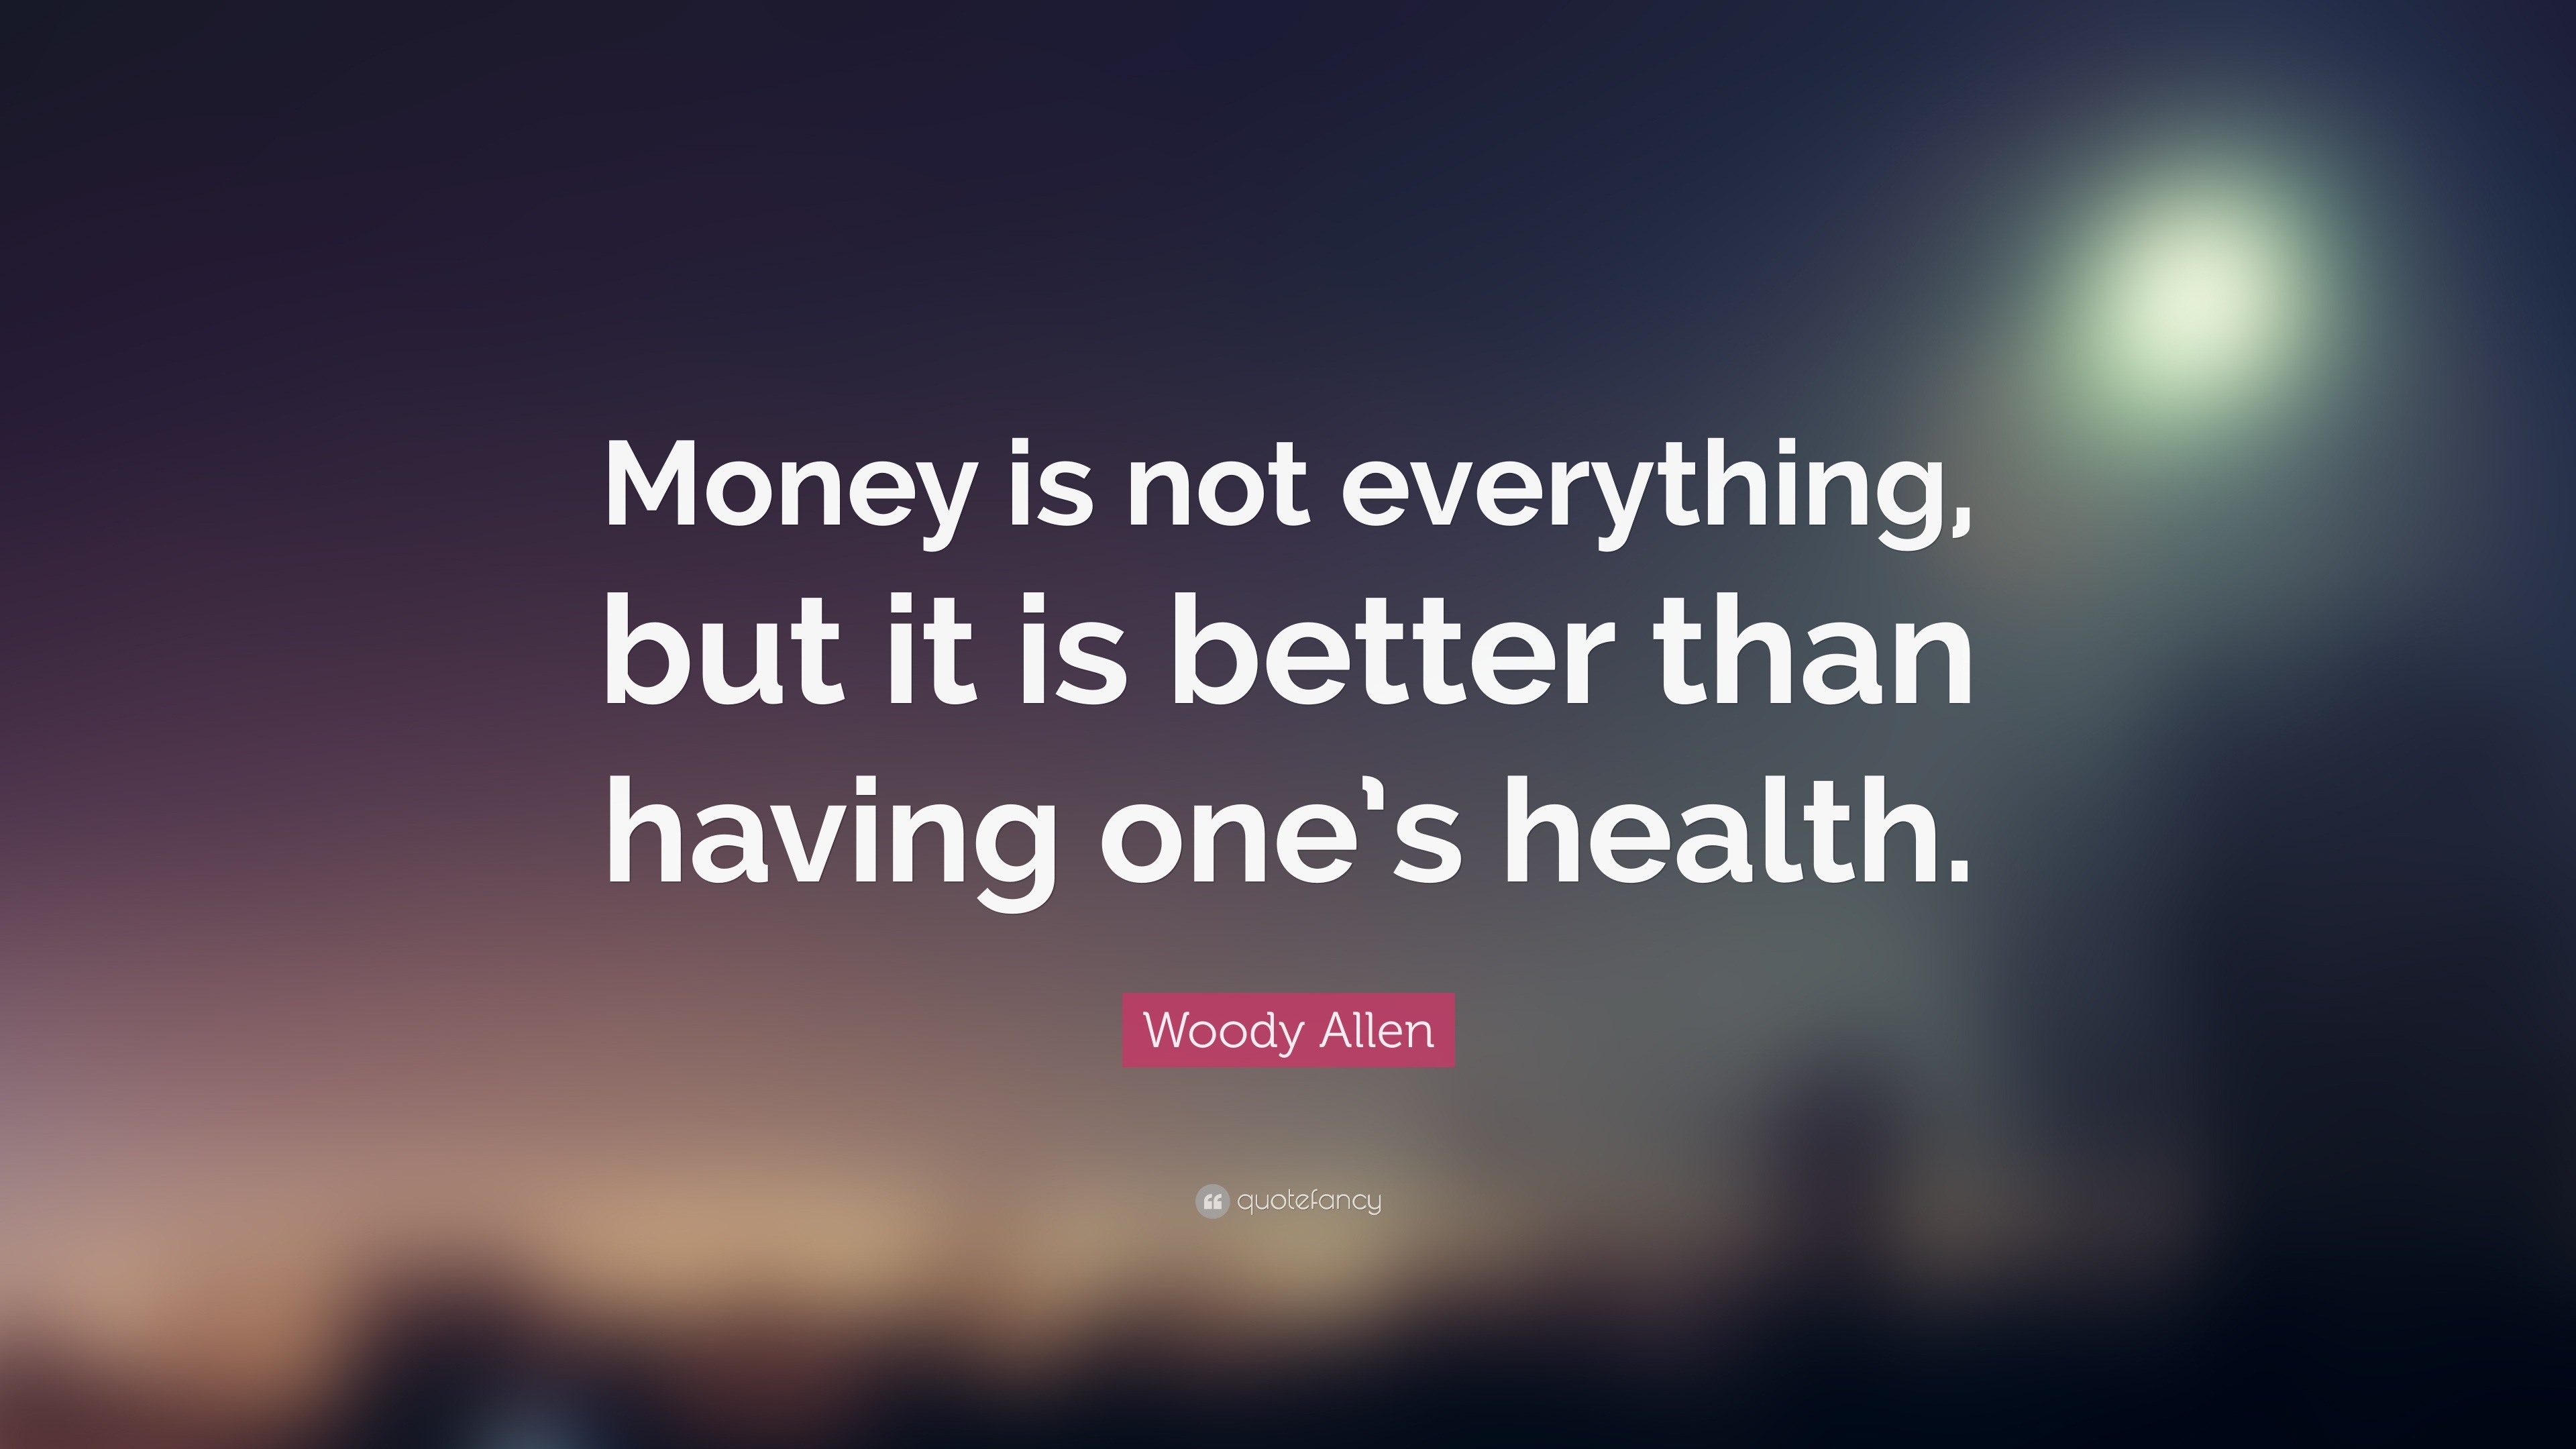 Woody Allen Quote: “Money Is Not Everything, But It Is Better Than Having One's Health.”